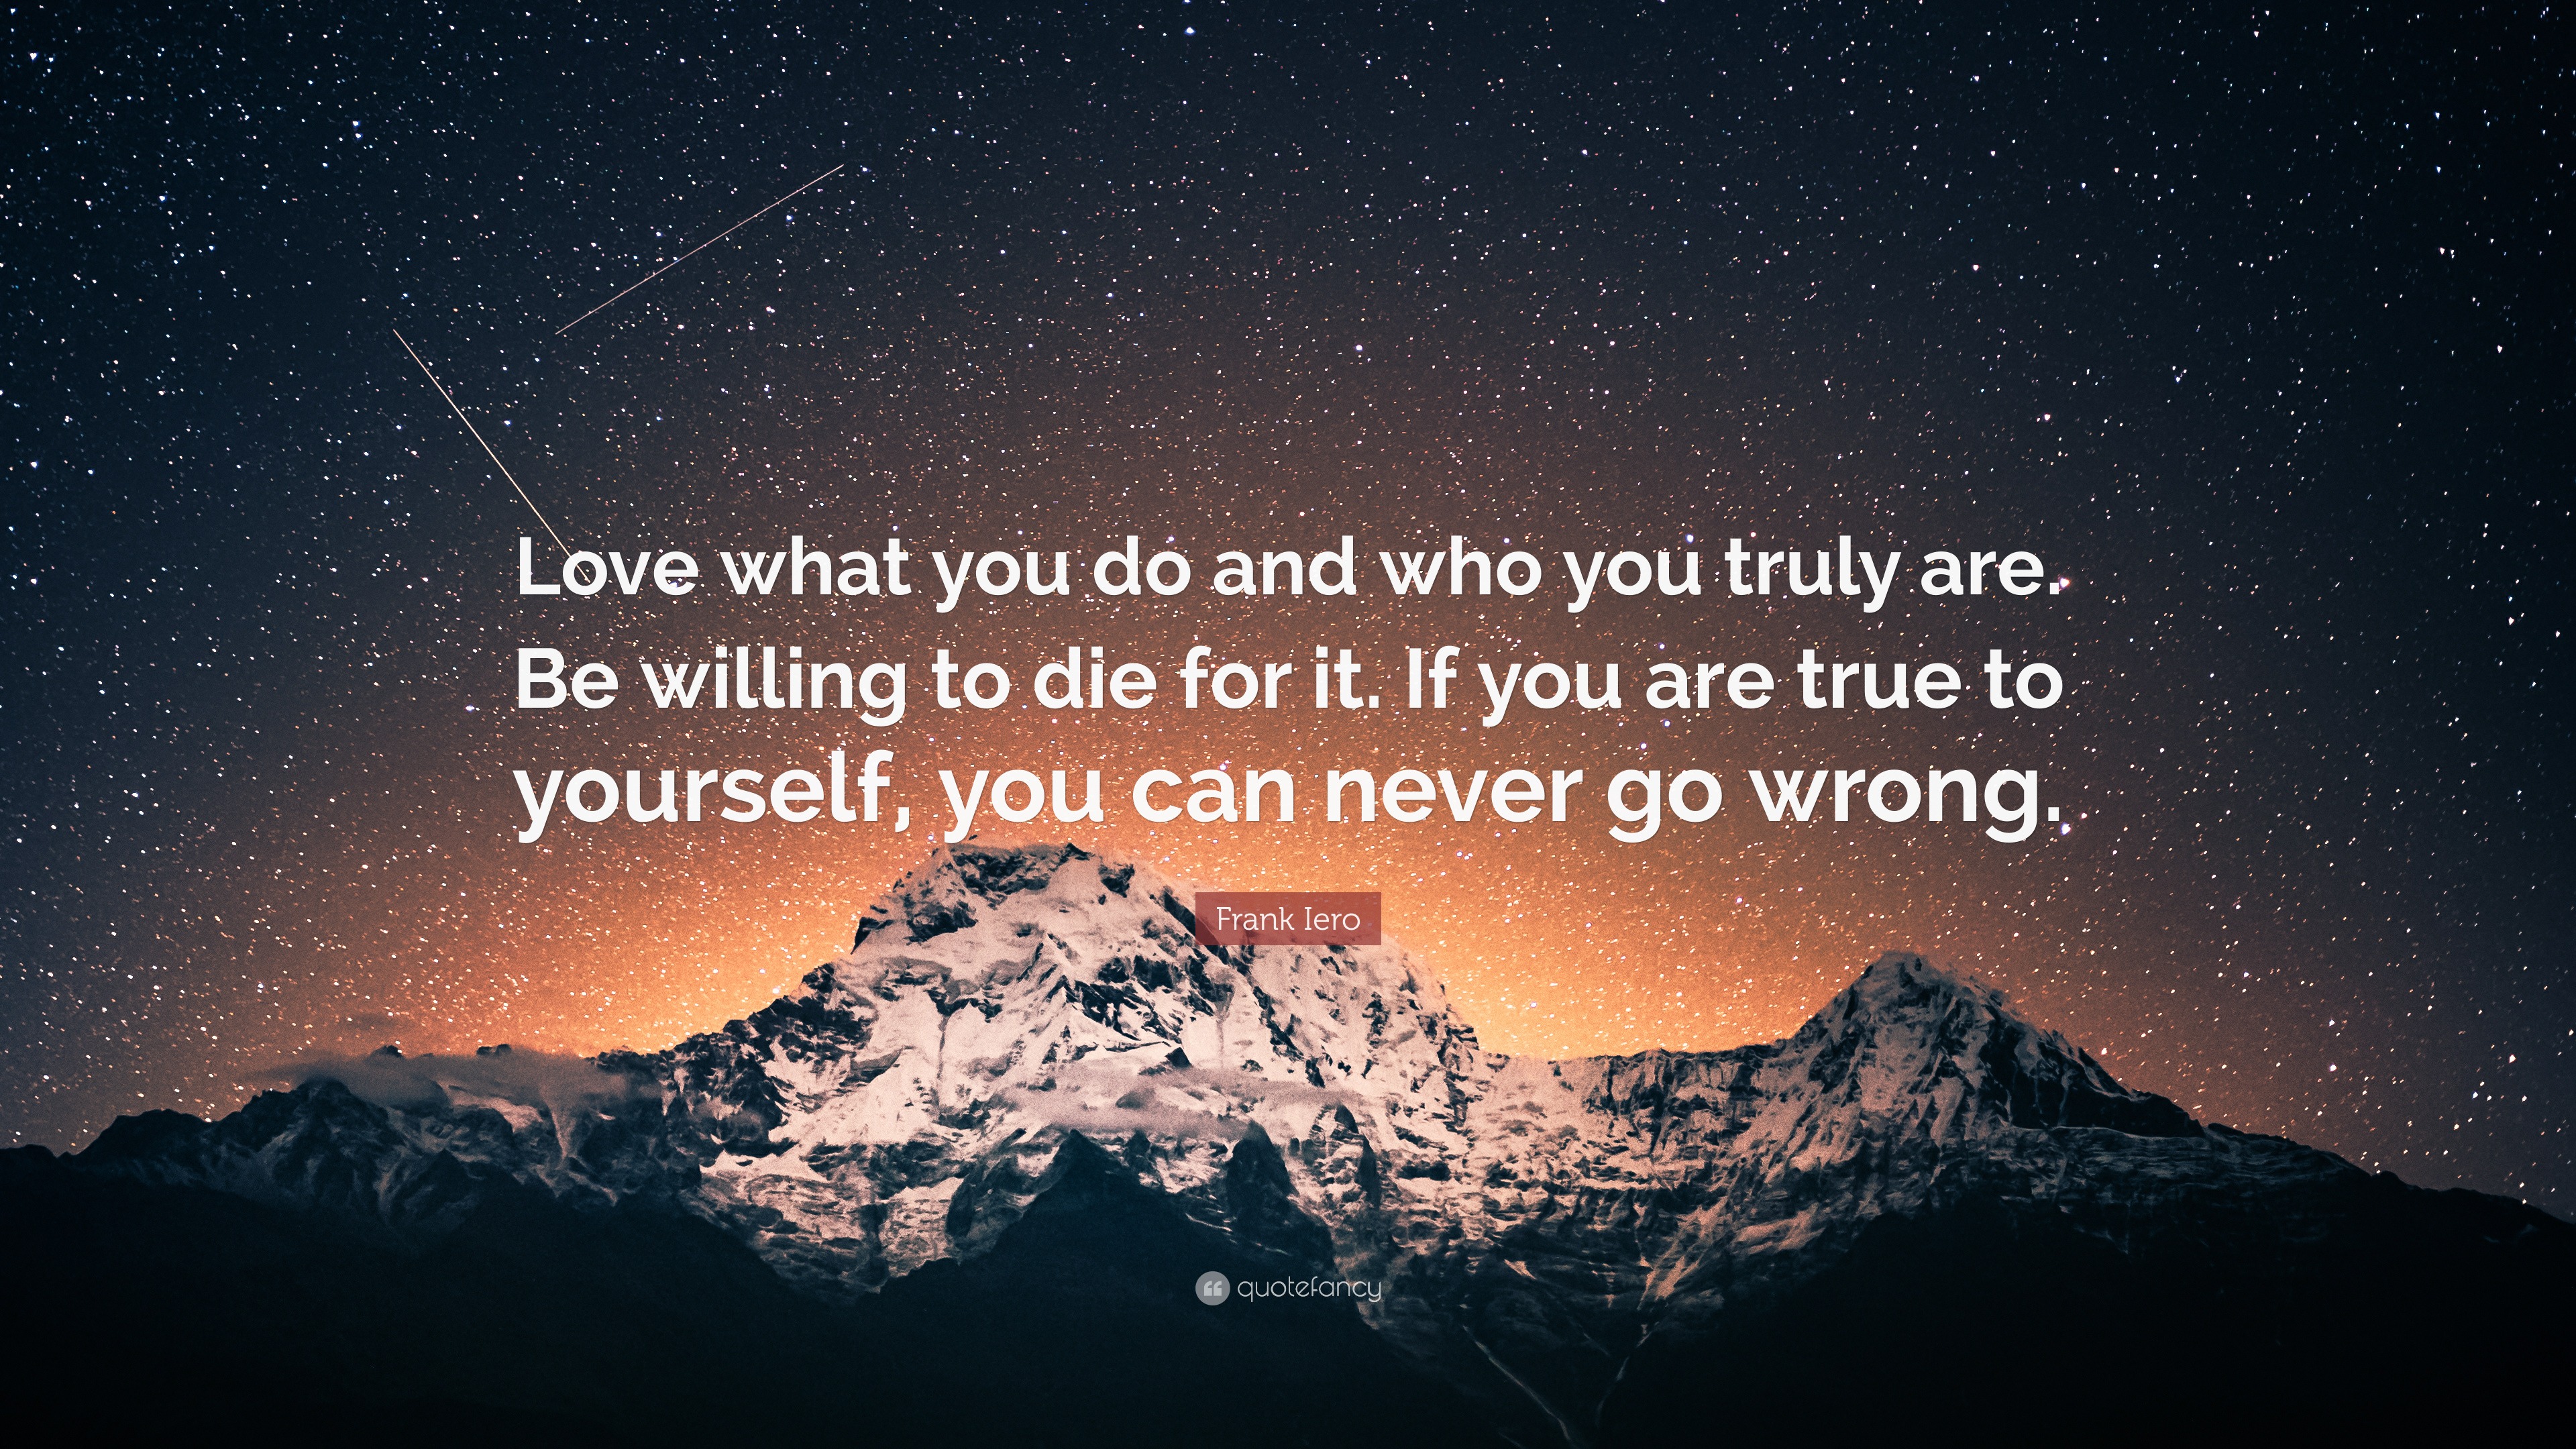 Frank Iero Quote: "Love what you do and who you truly are. Be willing to die for it. If you are ...